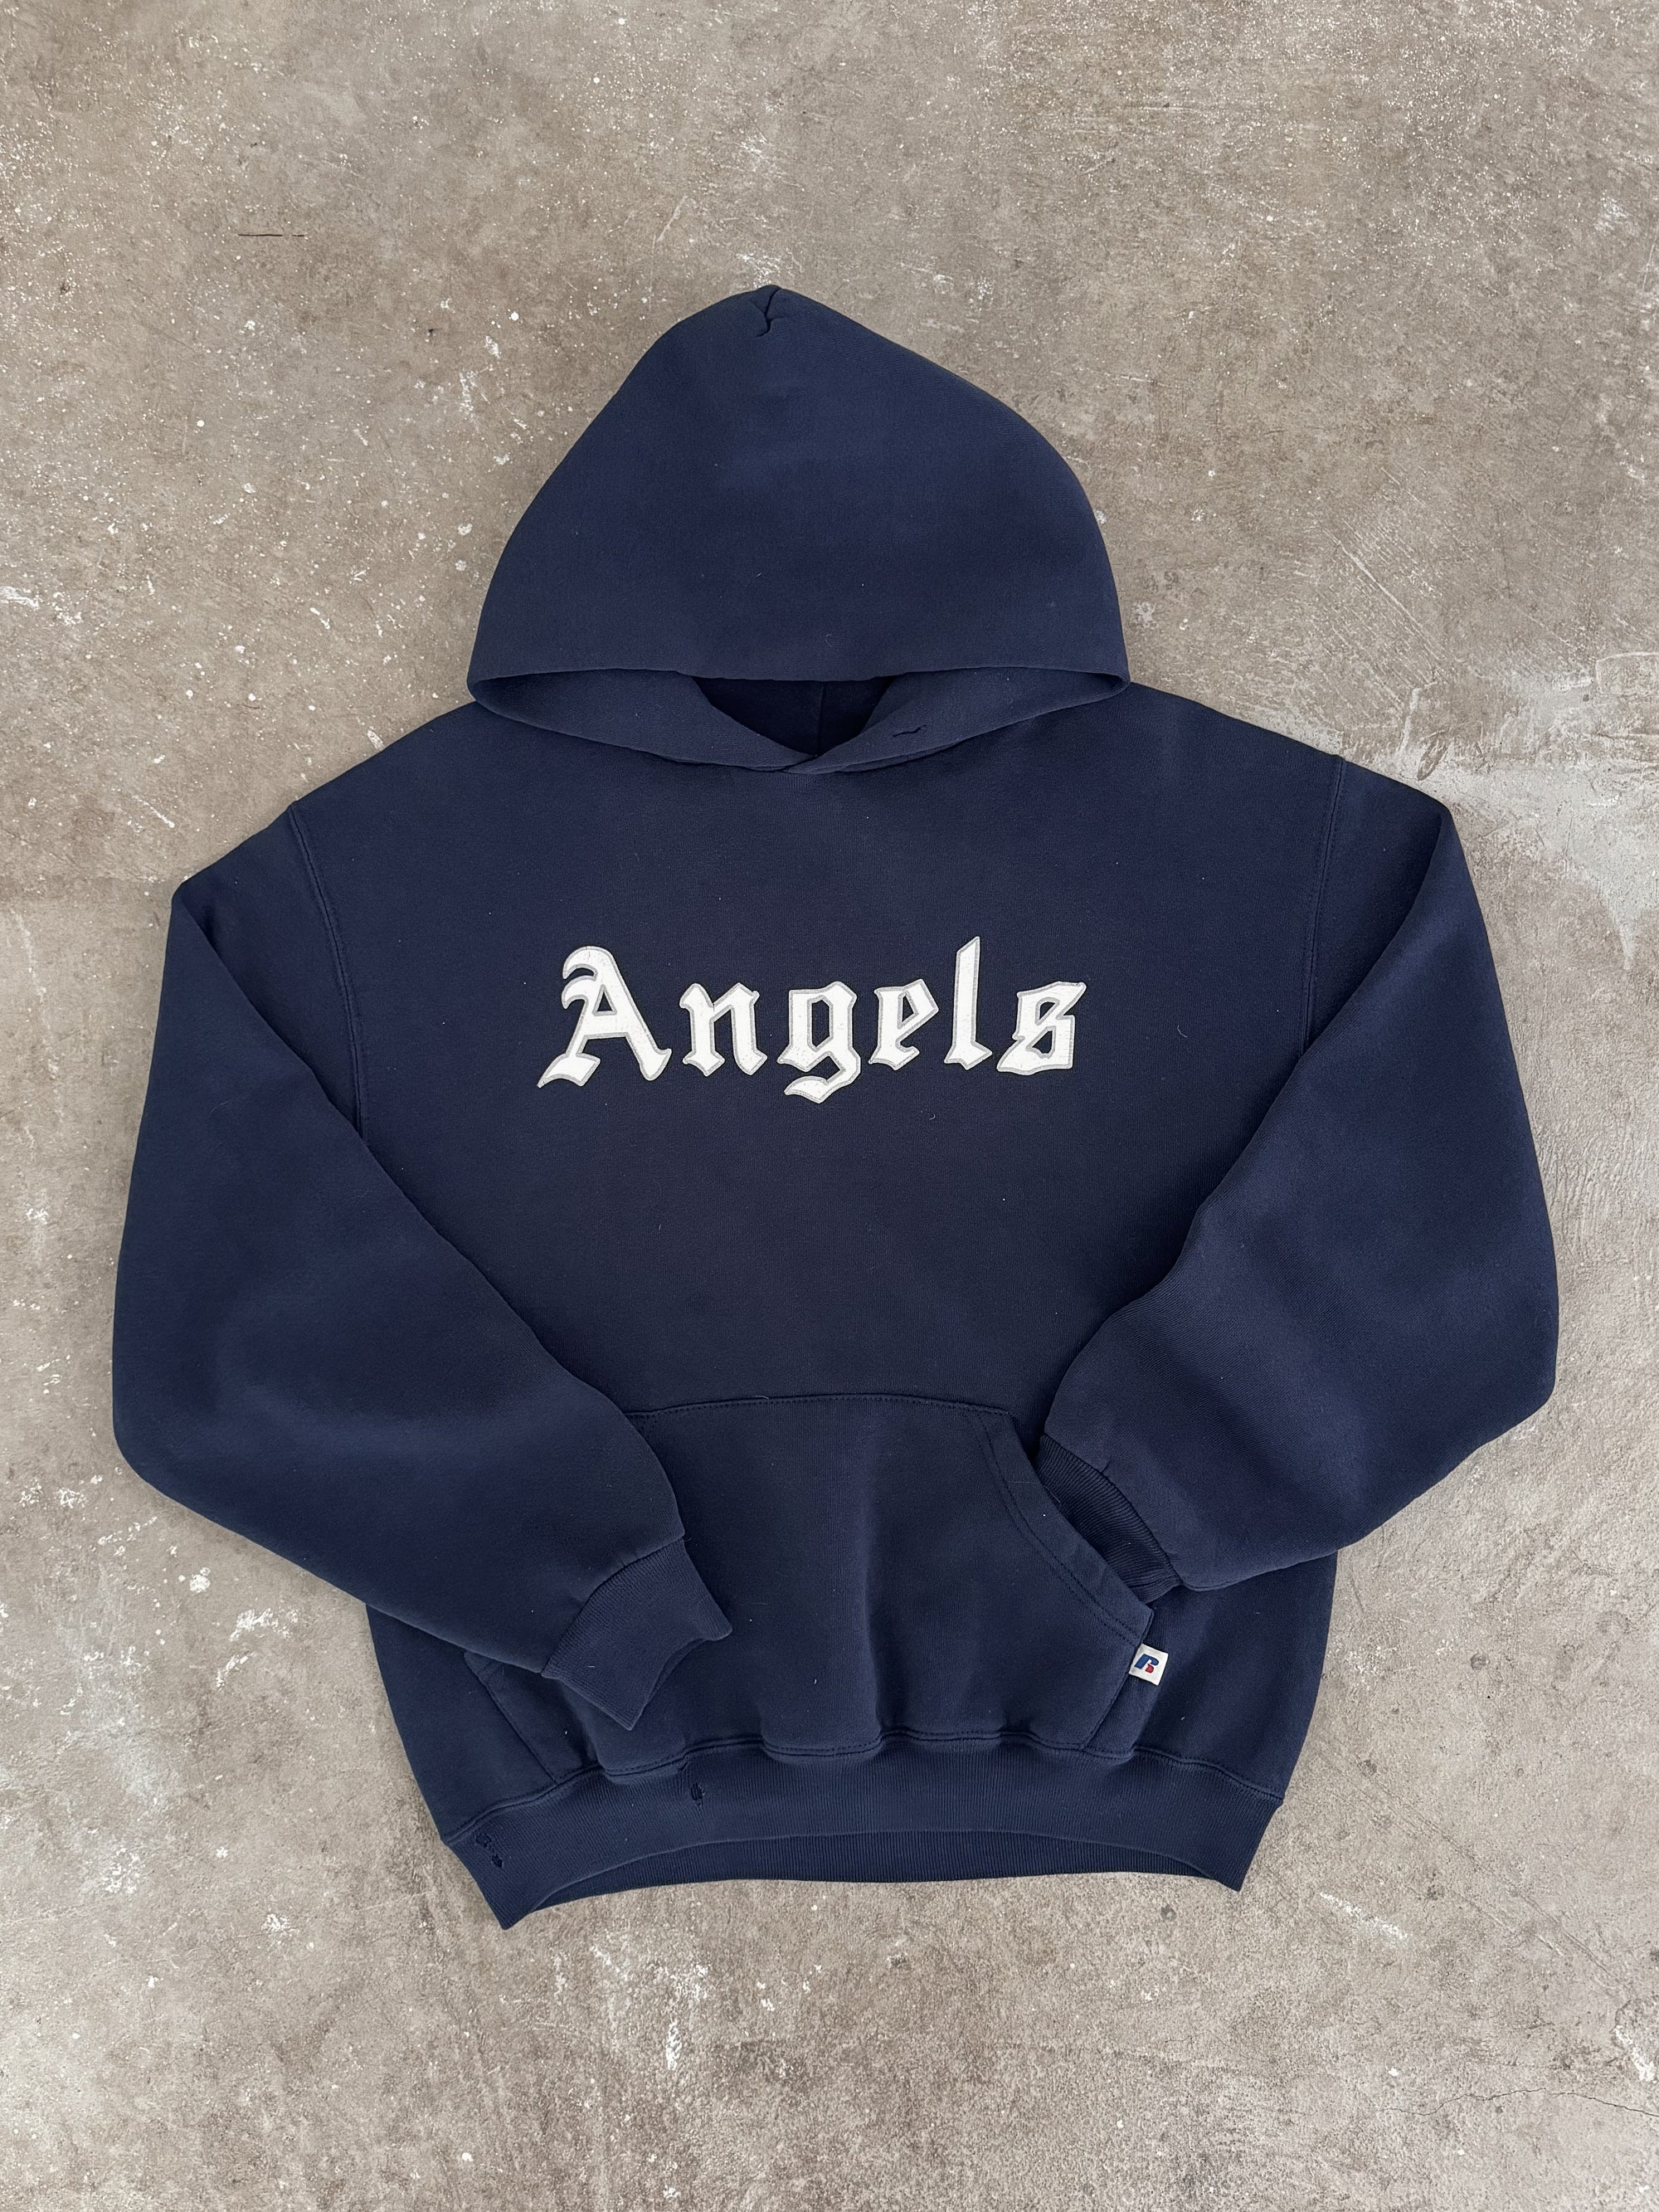 Early 00s Russell “Angels” Hoodie (M)